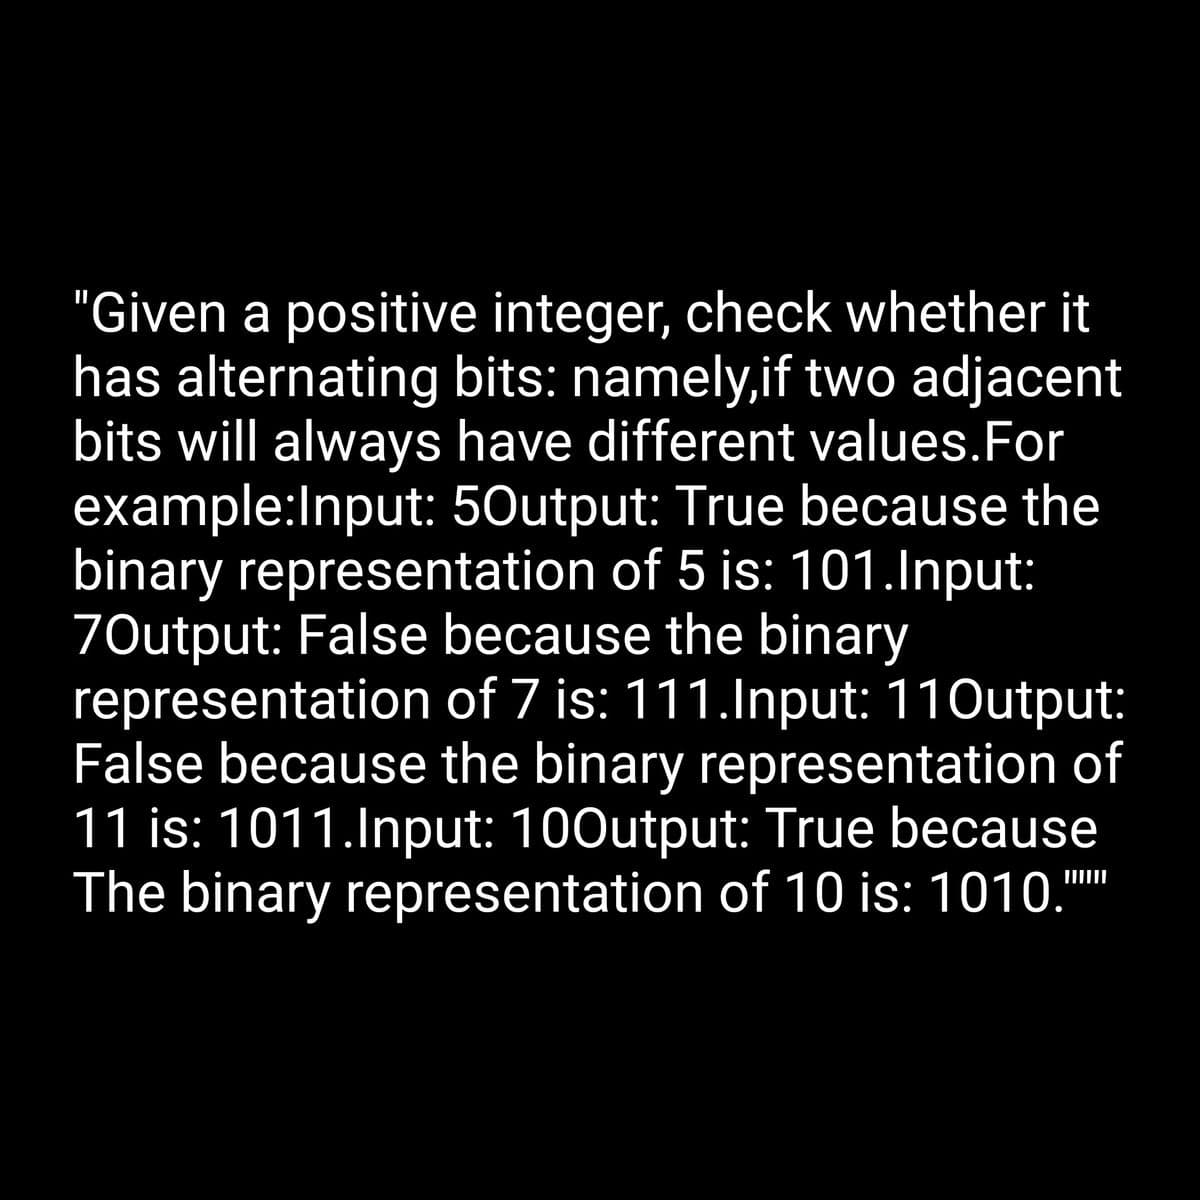 "Given a positive integer, check whether it
has alternating bits: namely,if two adjacent
bits will always have different values. For
example:Input: 50utput: True because the
binary representation of 5 is: 101.Input:
70utput: False because the binary
representation of 7 is: 111.Input: 11Output:
False because the binary representation of
11 is: 1011.Input: 100utput: True because
The binary representation of 10 is: 1010.""""